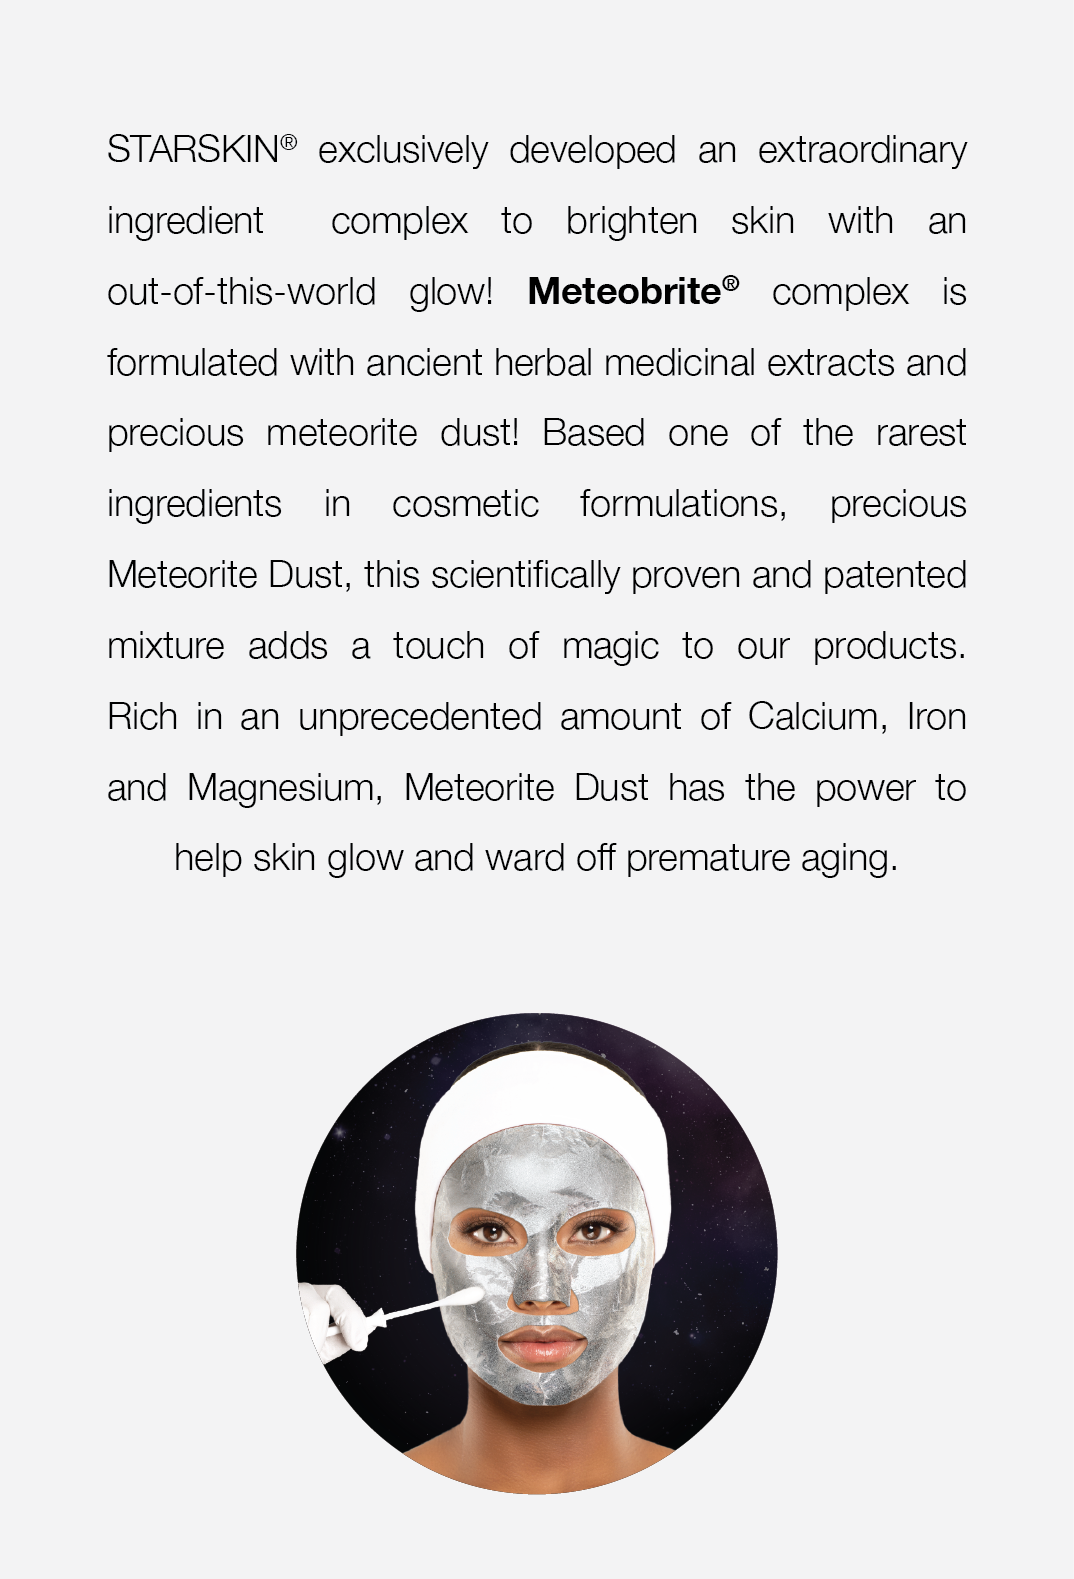  STARSKIN® exclusively developed an extraordinary ingredient complex to brighten skin with an out-of-this-world glow! Meteobrite® complex is formulated with ancient herbal medicinal extracts and precious meteorite dust! Based one of the rarest ingredients in cosmetic formulations, precious Meteorite Dust, this scientifically proven and patented mixture adds a touch of magic to our products. Rich in an unprecedented amount of Calcium, Iron and Magnesium, Meteorite Dust has the power to help skin glow and ward off premature aging